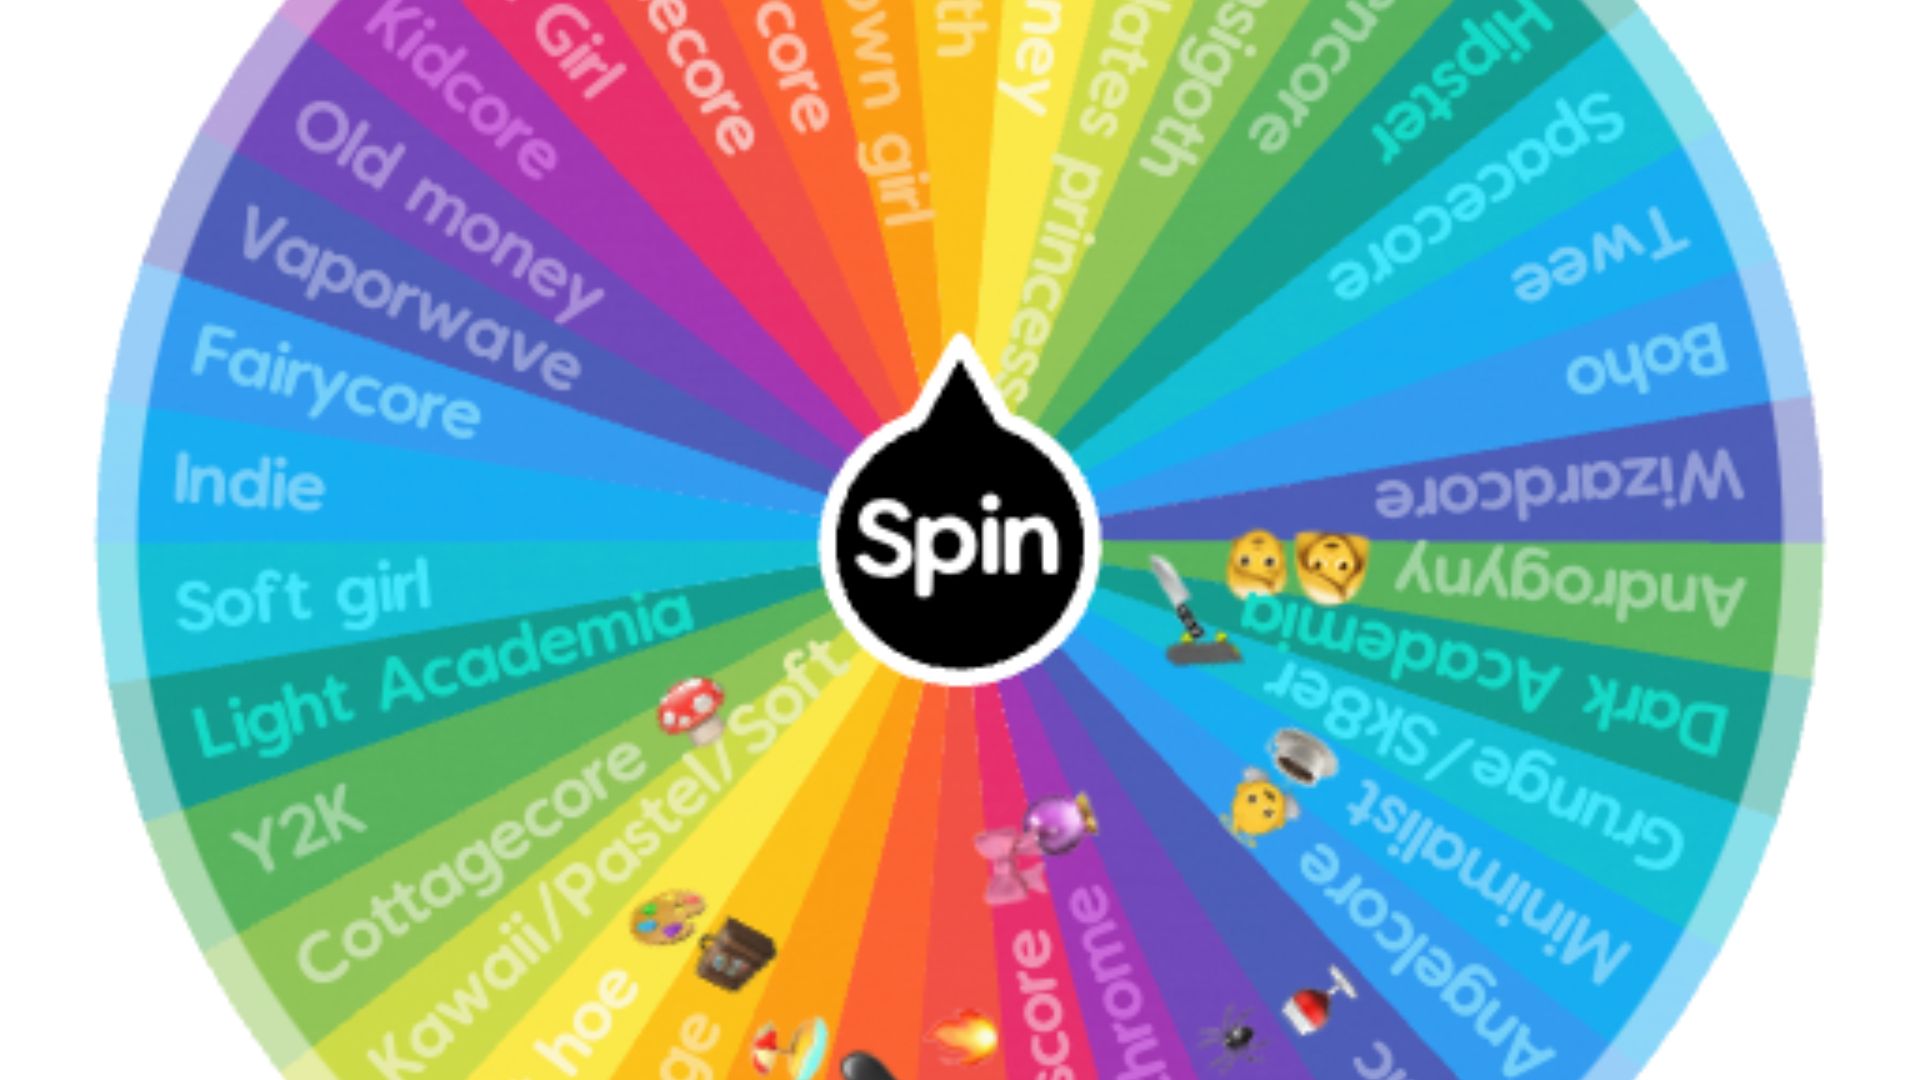 this image shows one of the Spin Wheel Designs